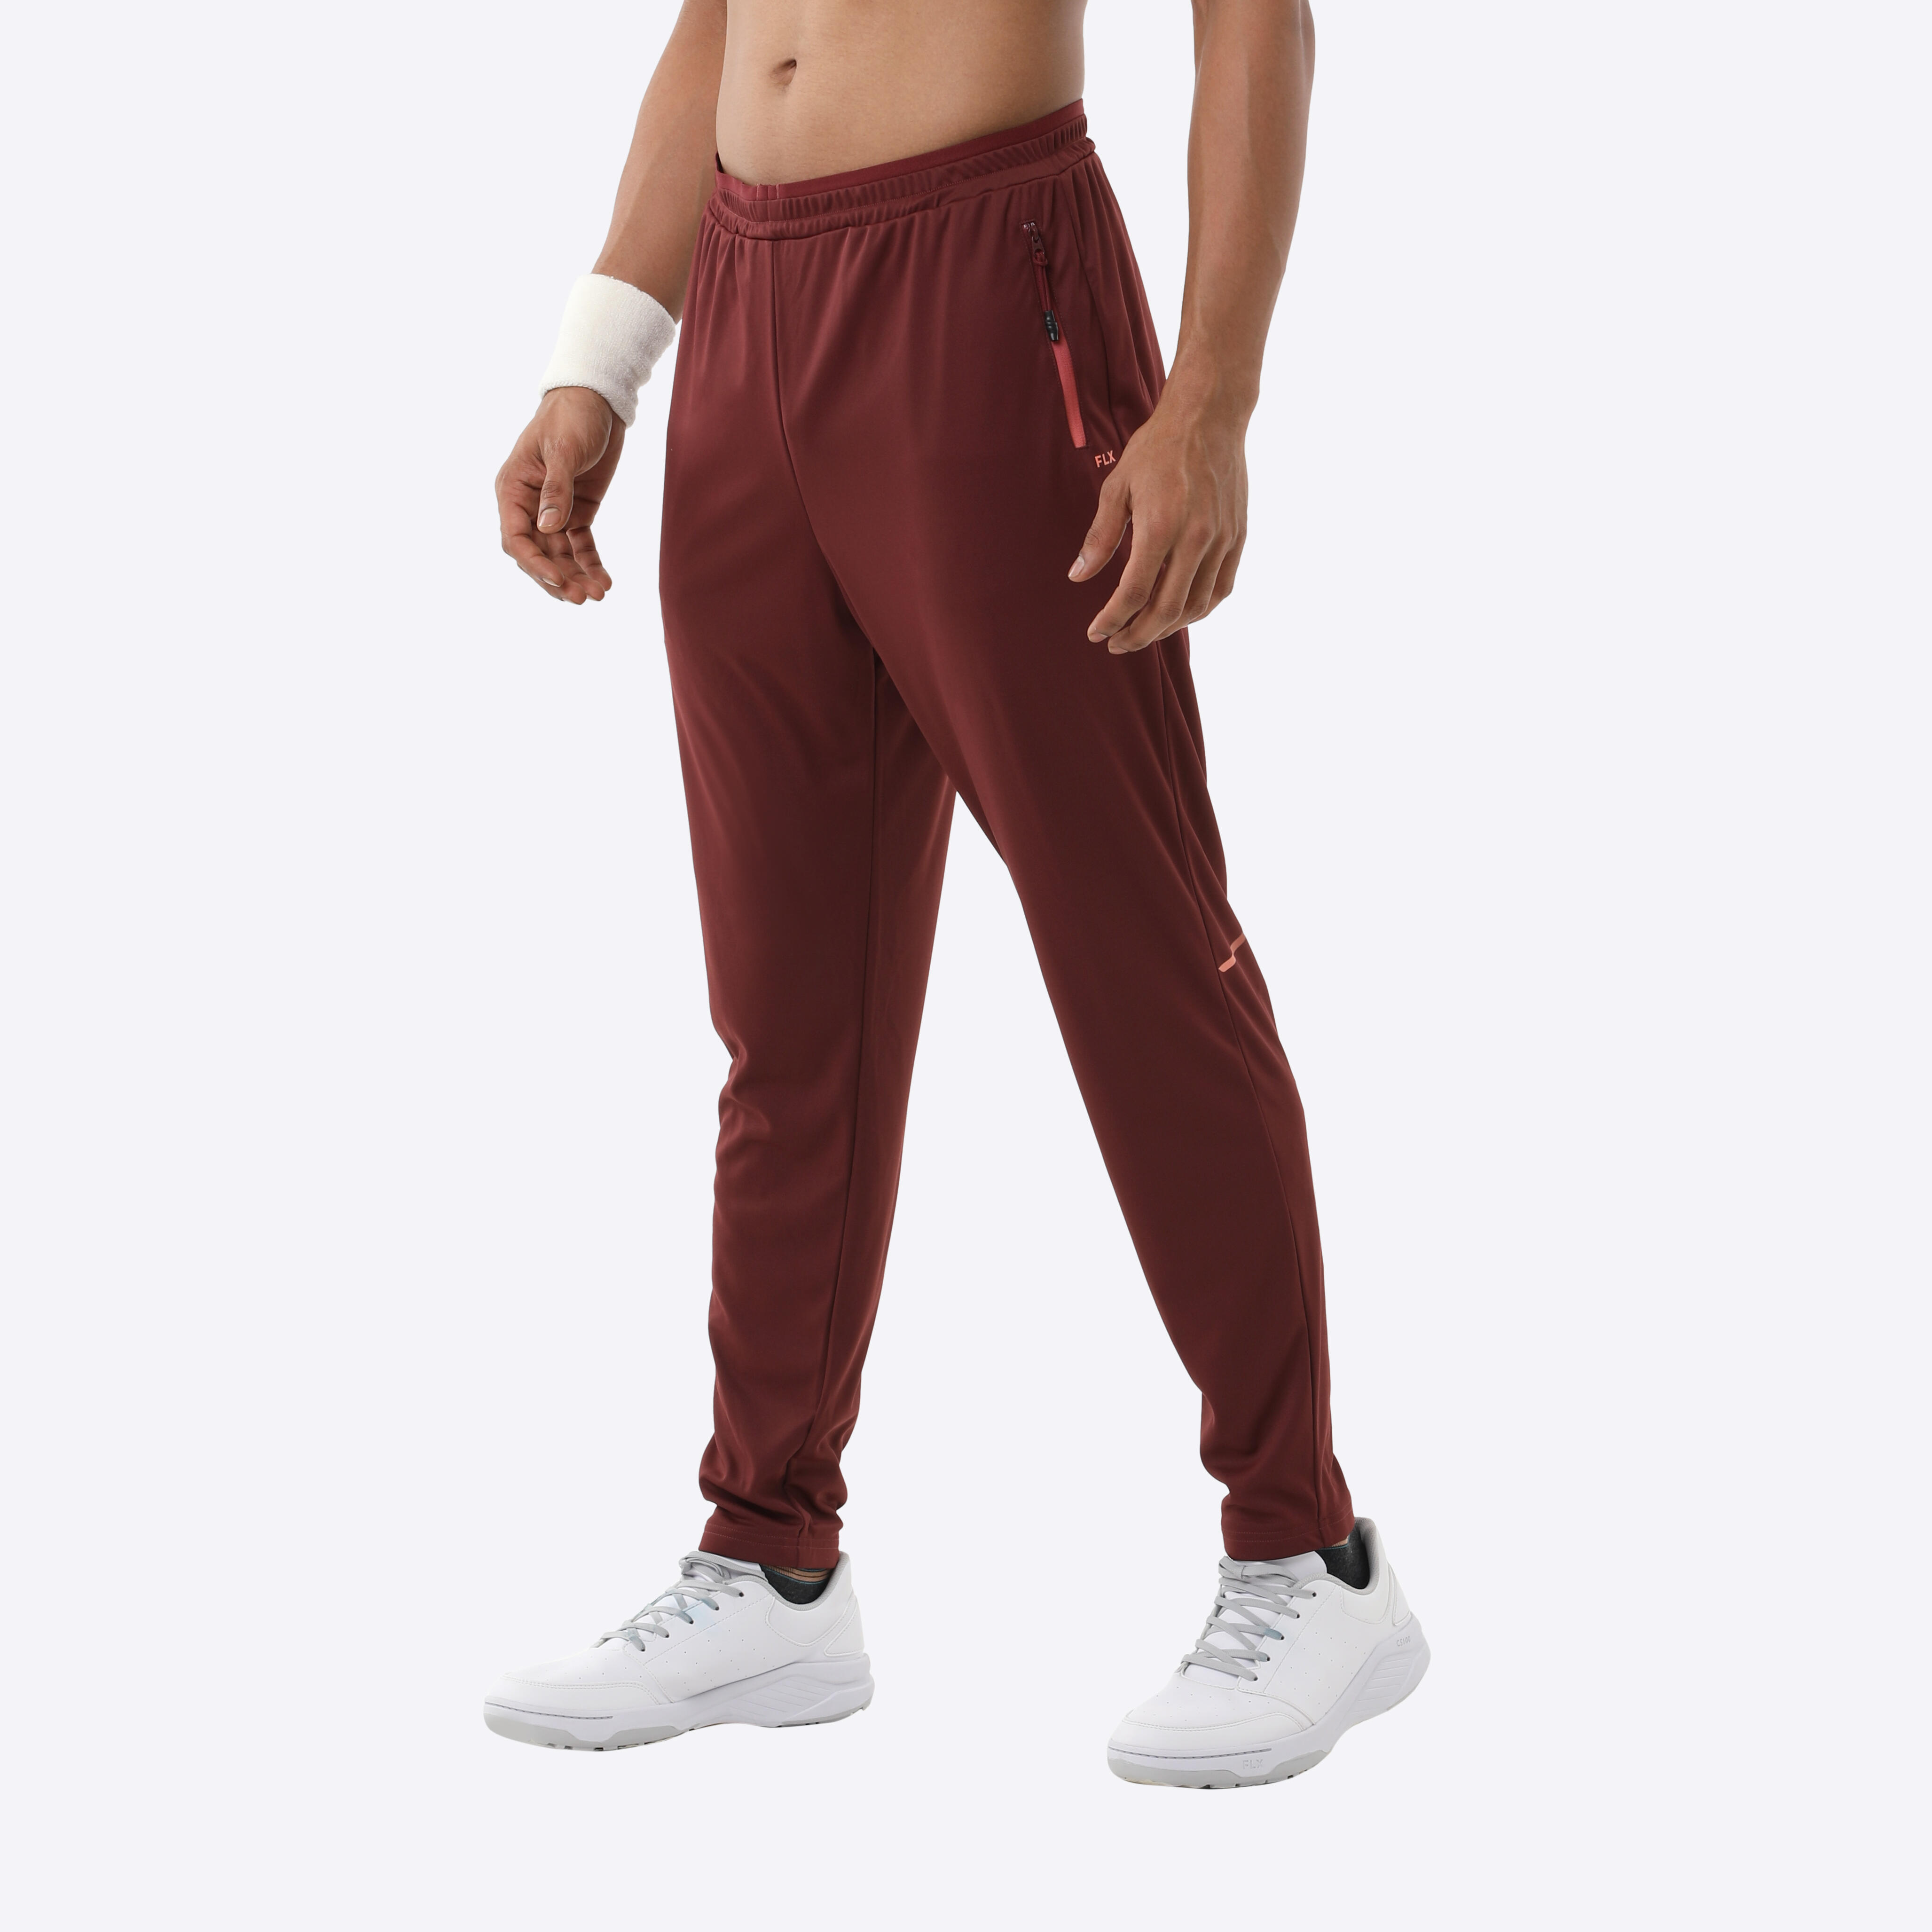 Polyester Men Cricket Track Pant, Solid, White at Rs 180/piece in Ludhiana  | ID: 2852085062788